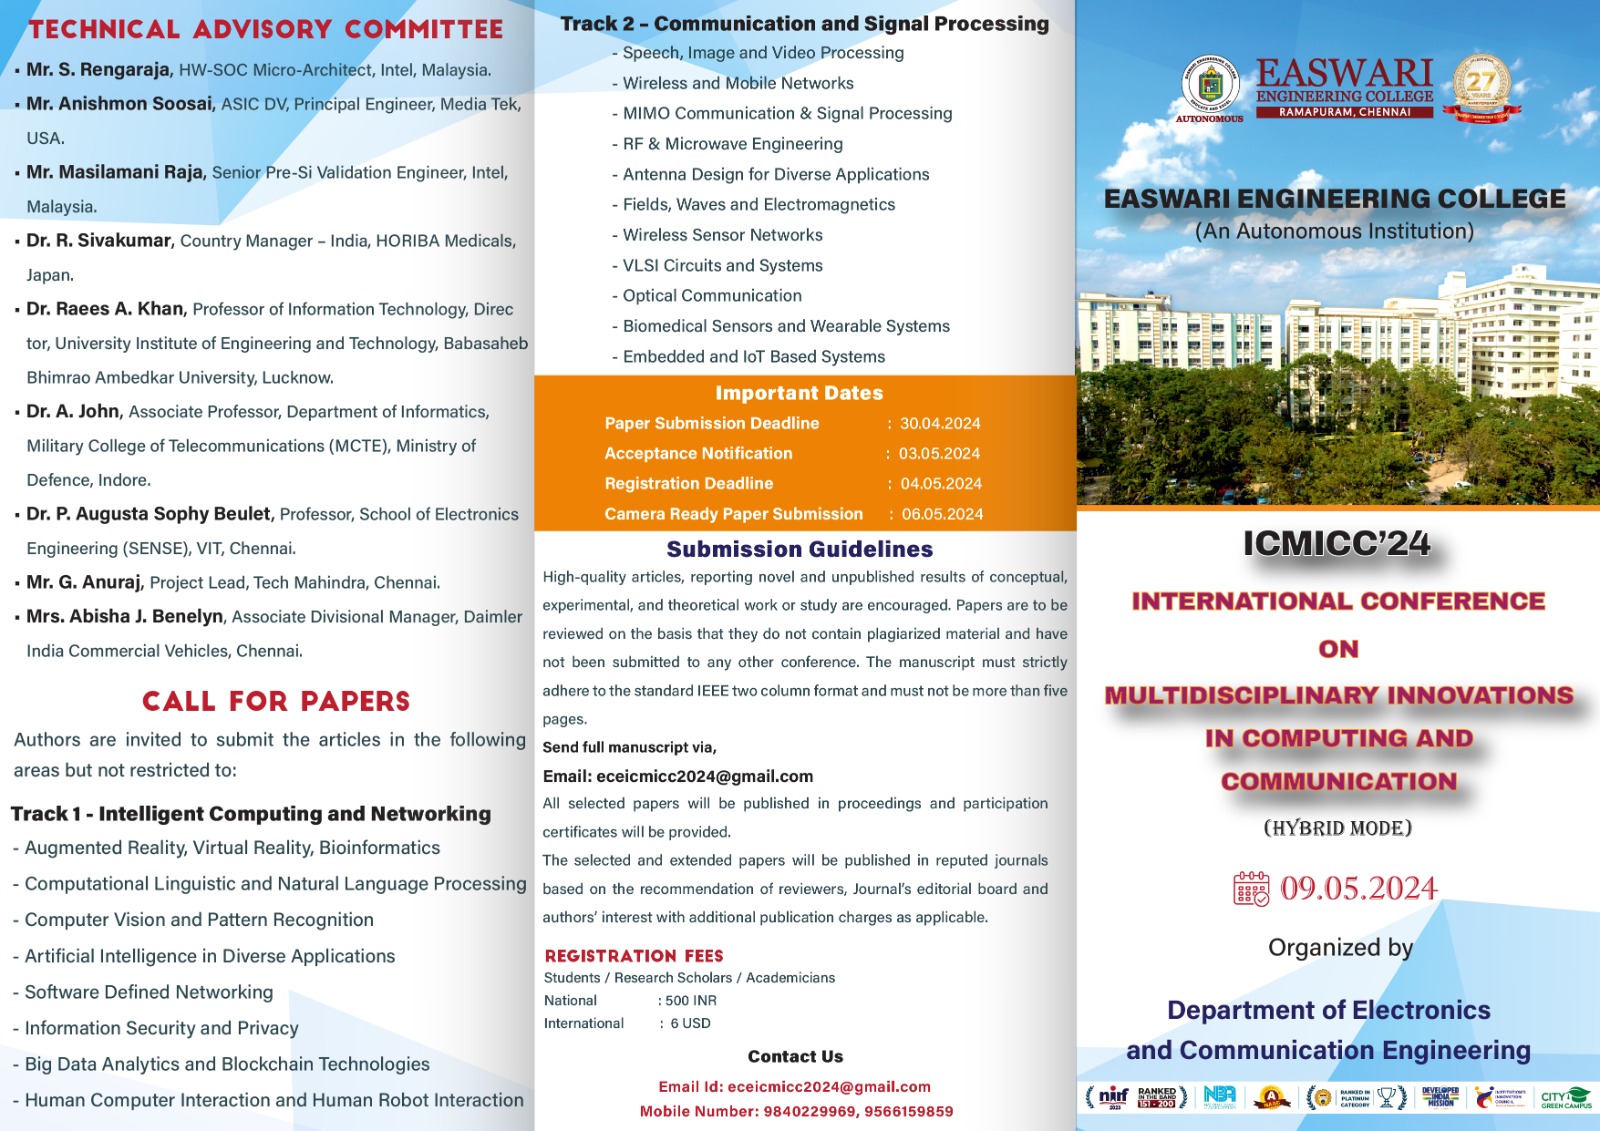 International Conference on Multidisciplinary Innovations in Computing and Communication (ICMICC'24)